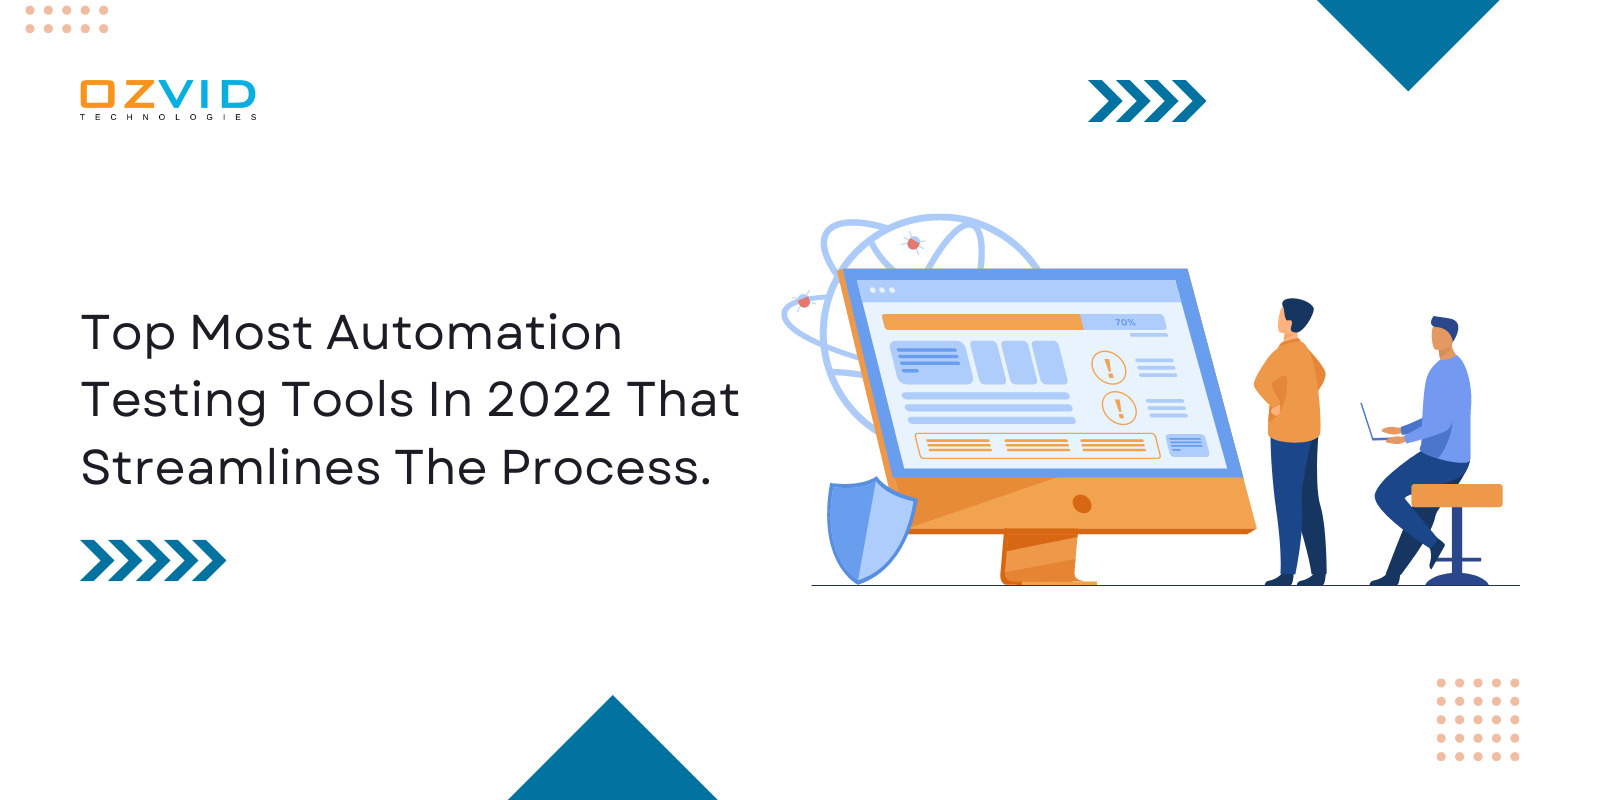 Top Most Automation Testing Tools In 2022 That Streamlines The Process